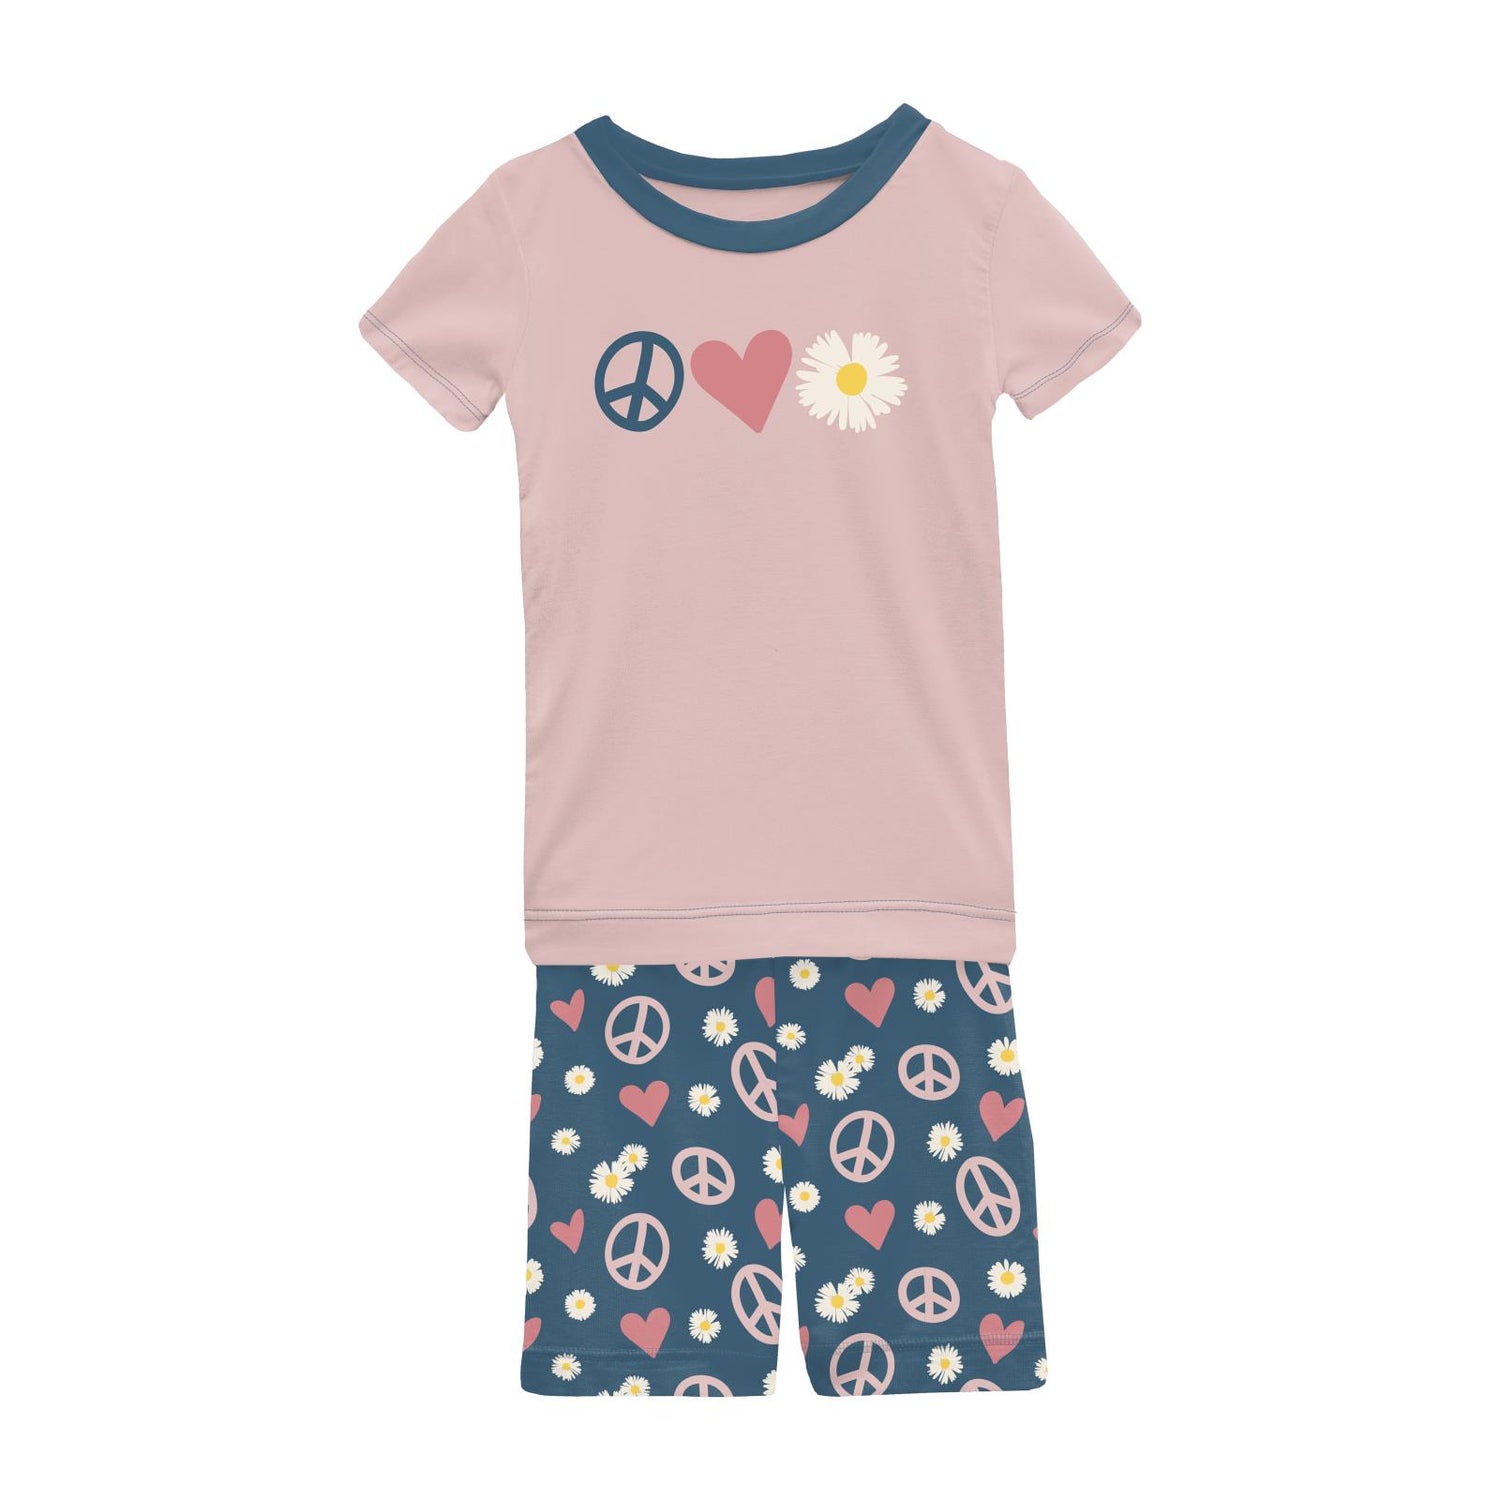 Short Sleeve Graphic Tee Pajama Set with Shorts in Peace, Love and Happiness